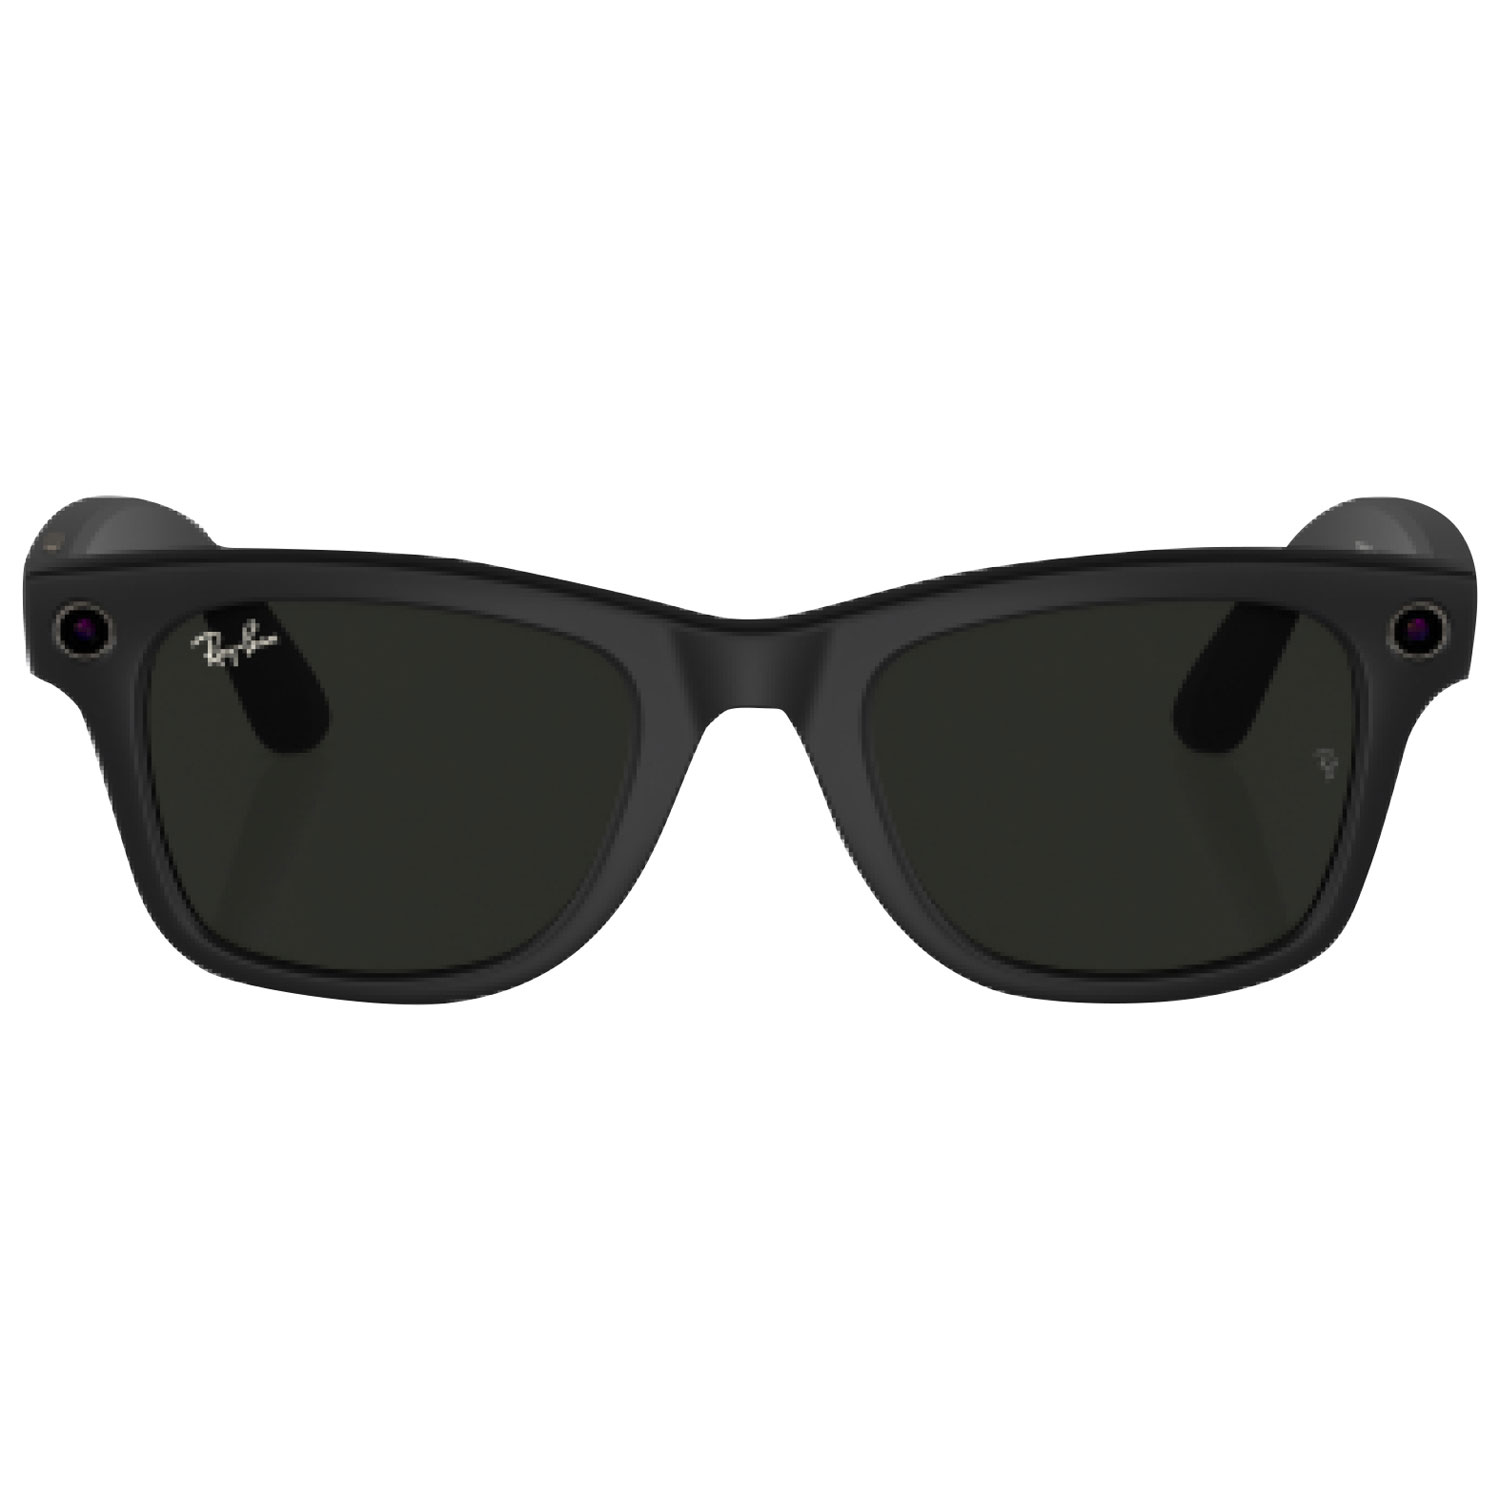 Ray-Ban | Meta Wayfarer Smart Glasses with AI, Photo, Video, Audio & Messaging - Matte Black/Clear to G-15 Green Transitions